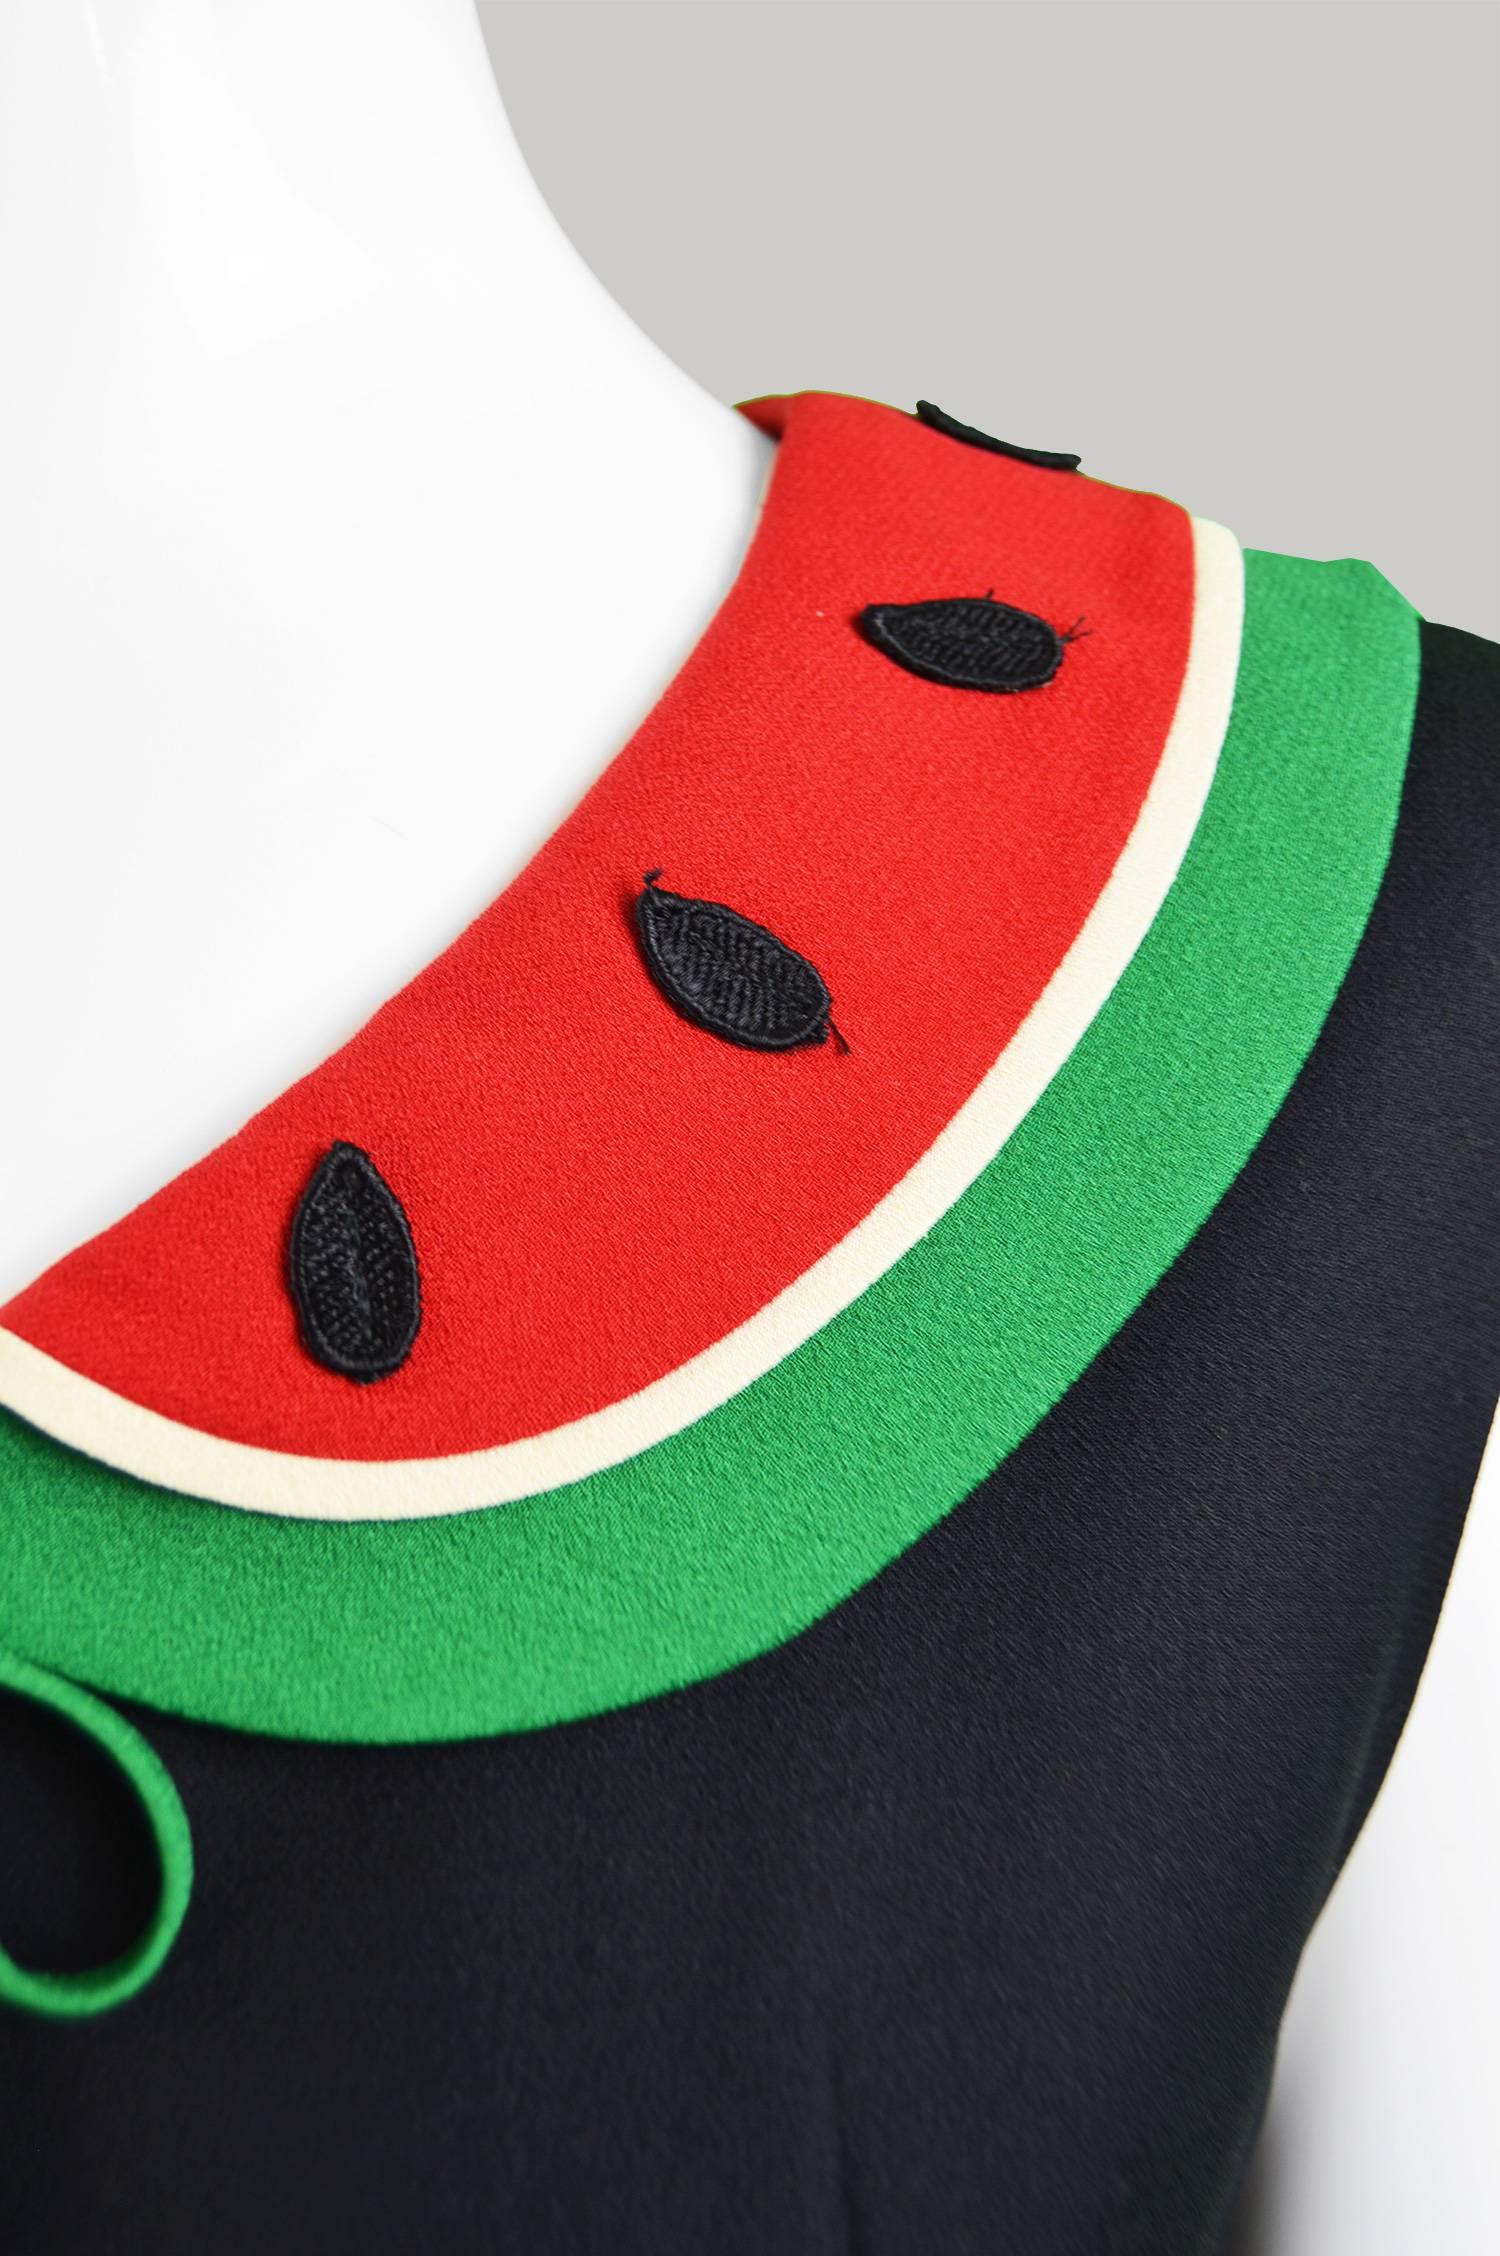 Moschino Cheap & Chic Vintage Watermelon Collar Dress, 1990s In Excellent Condition In Doncaster, South Yorkshire